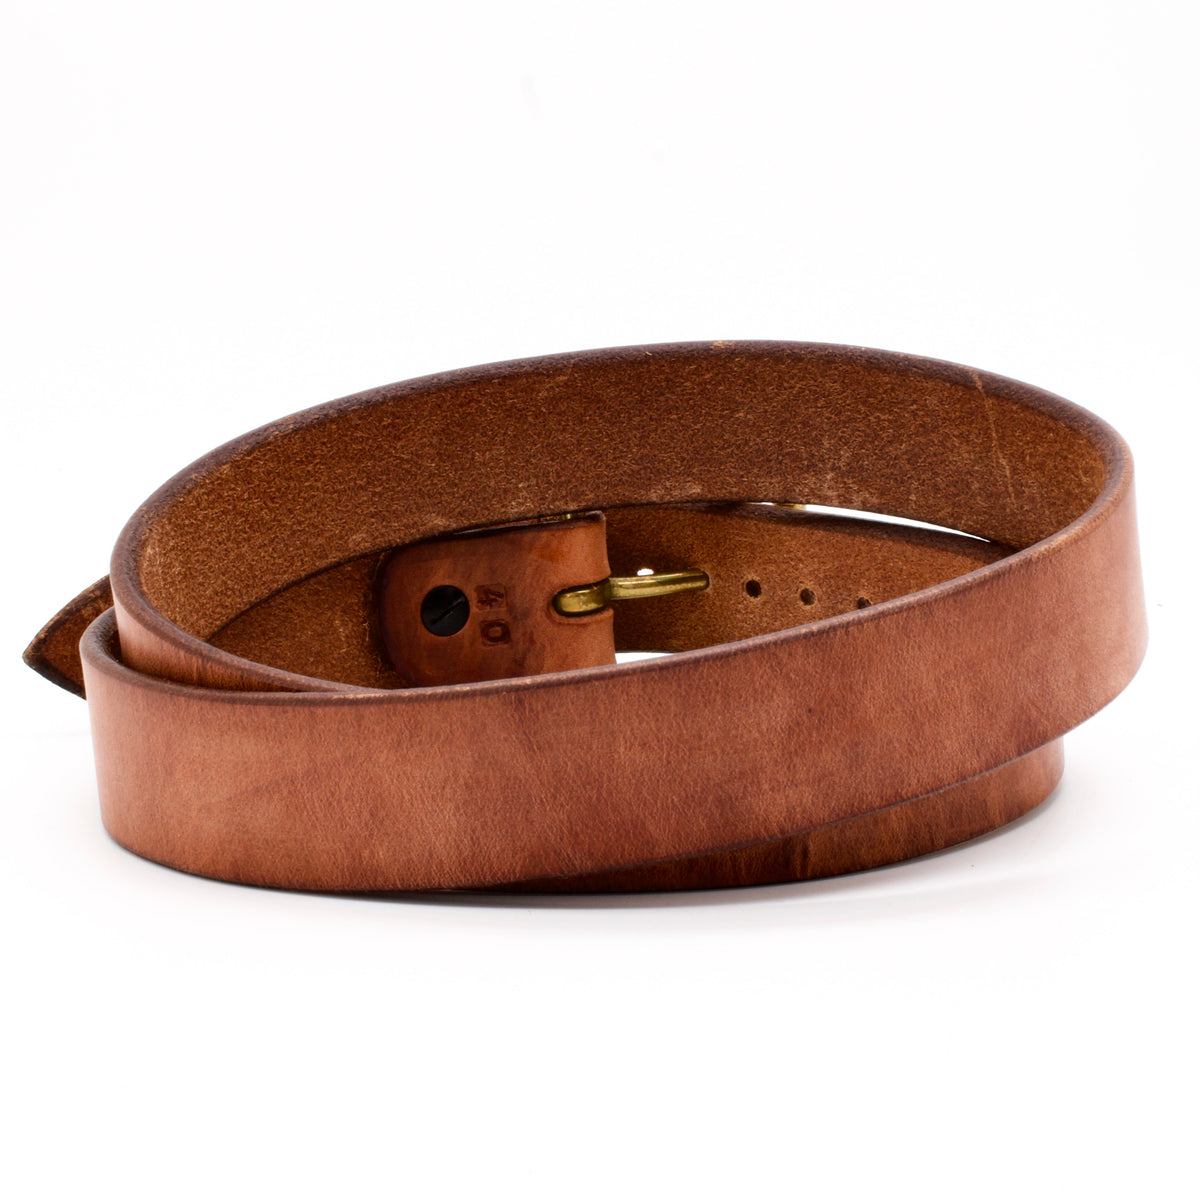 CLASSIC NATURAL OAK SELECT 1.5 Limited Edition Leather Belt